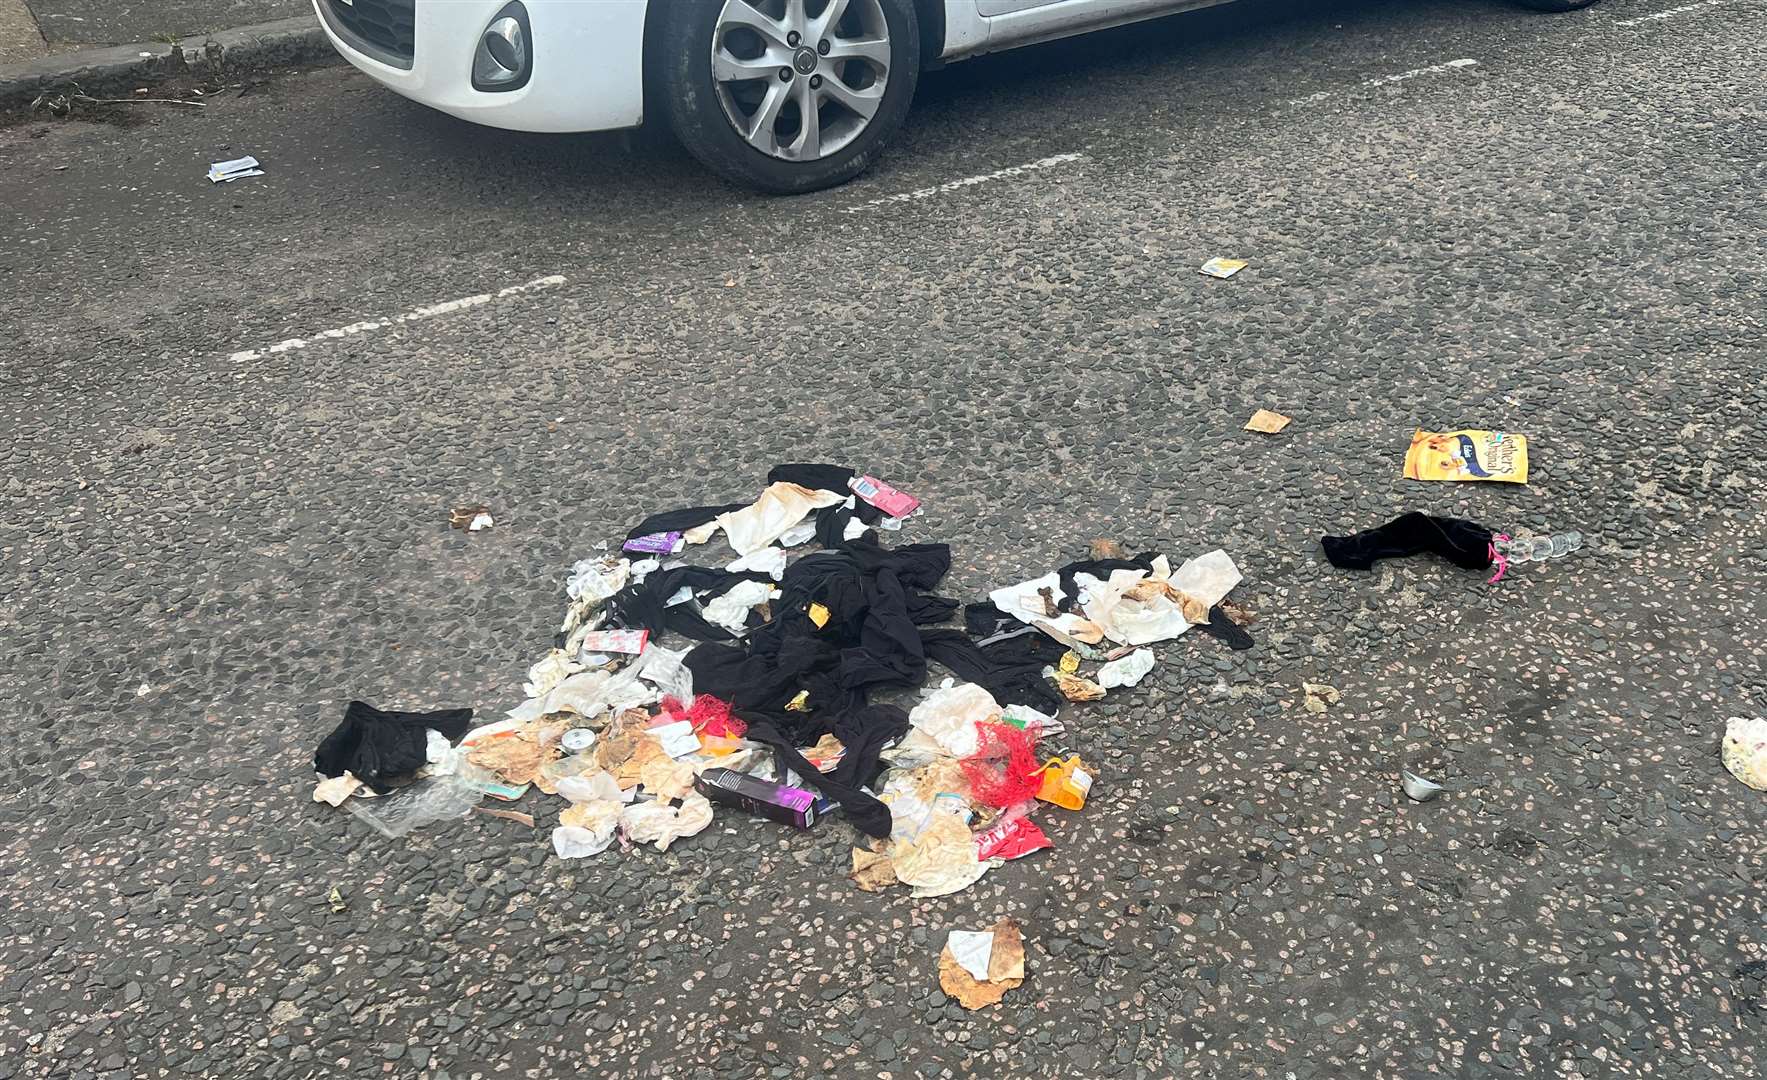 Litter blights communities, says the government